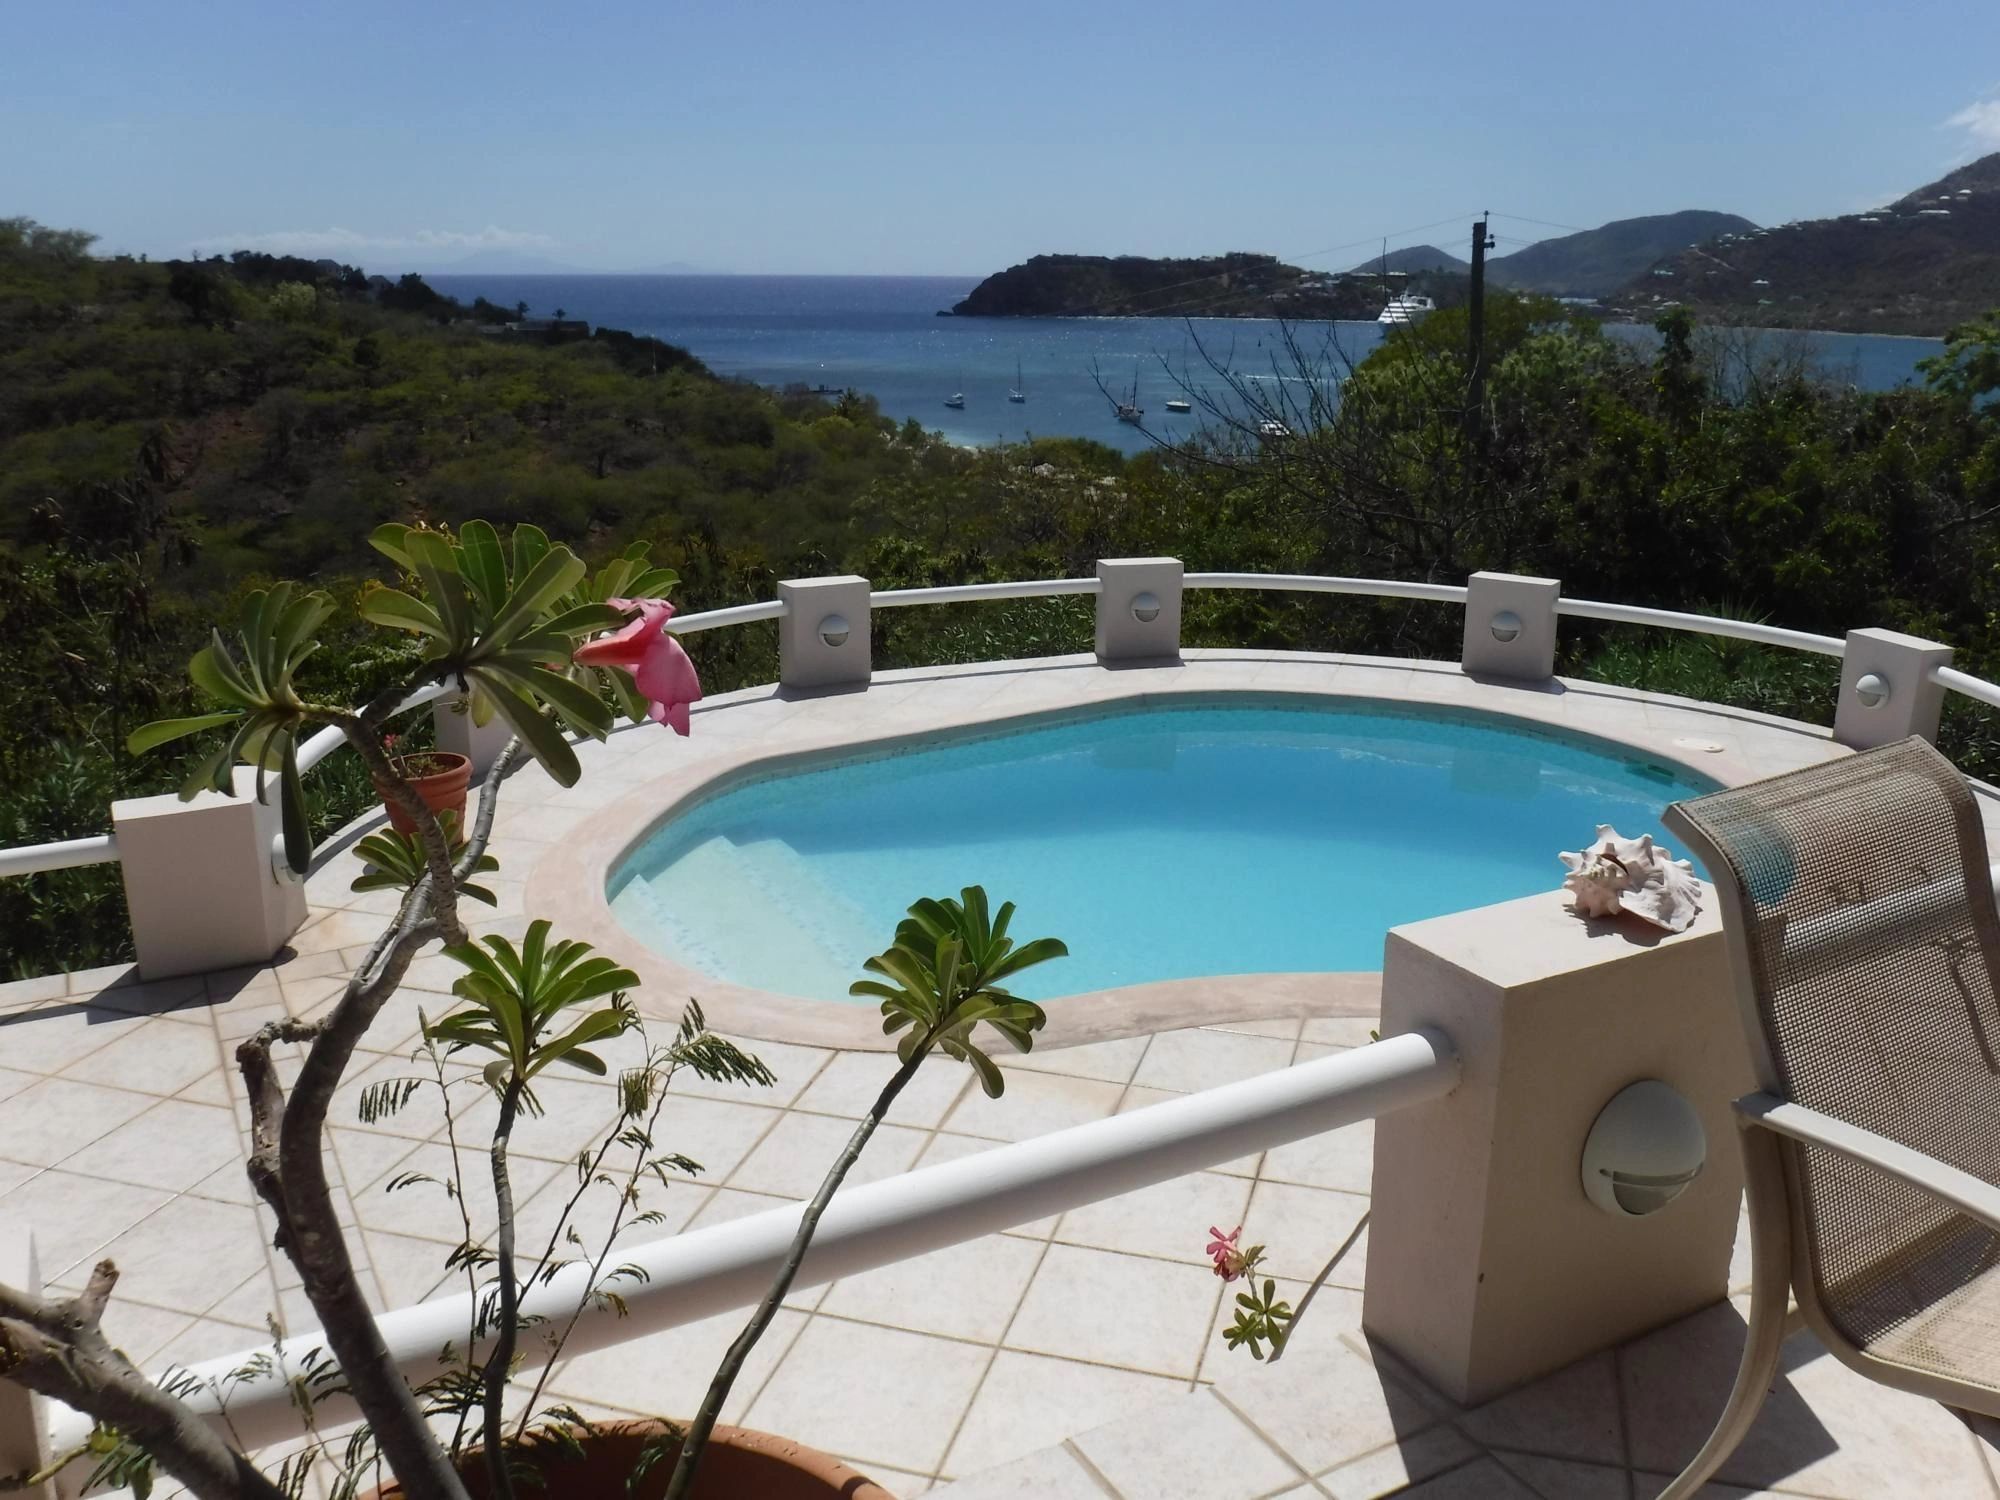 Private pool with views over Pigeon Beach, Montserrat and Turtle Bay. 